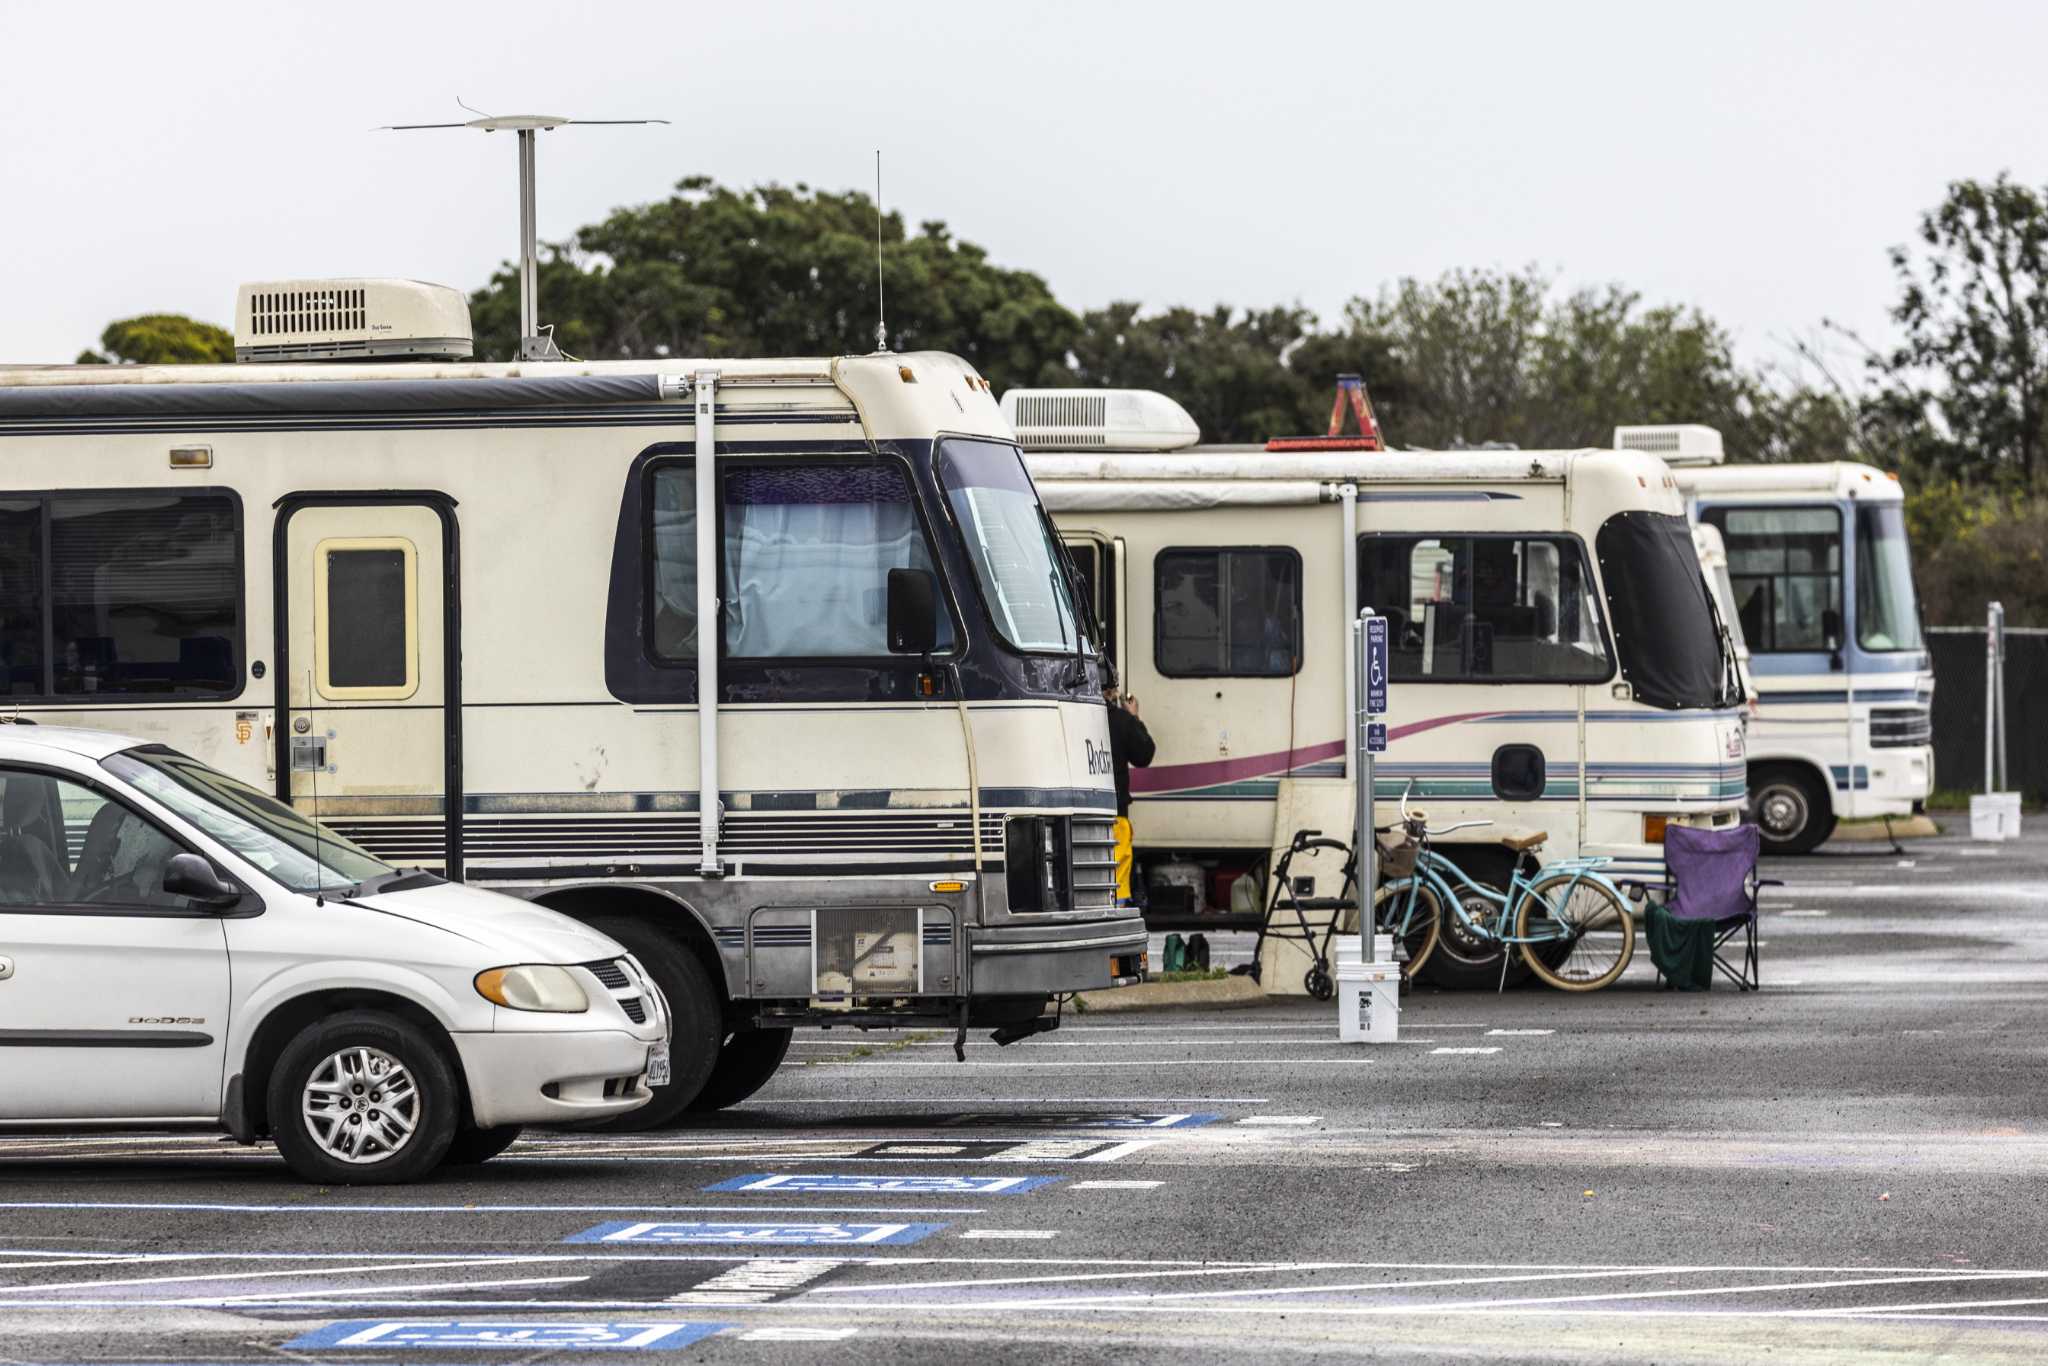 Sacramento Approves 'Safe Stay' Parking for Unhoused Residents